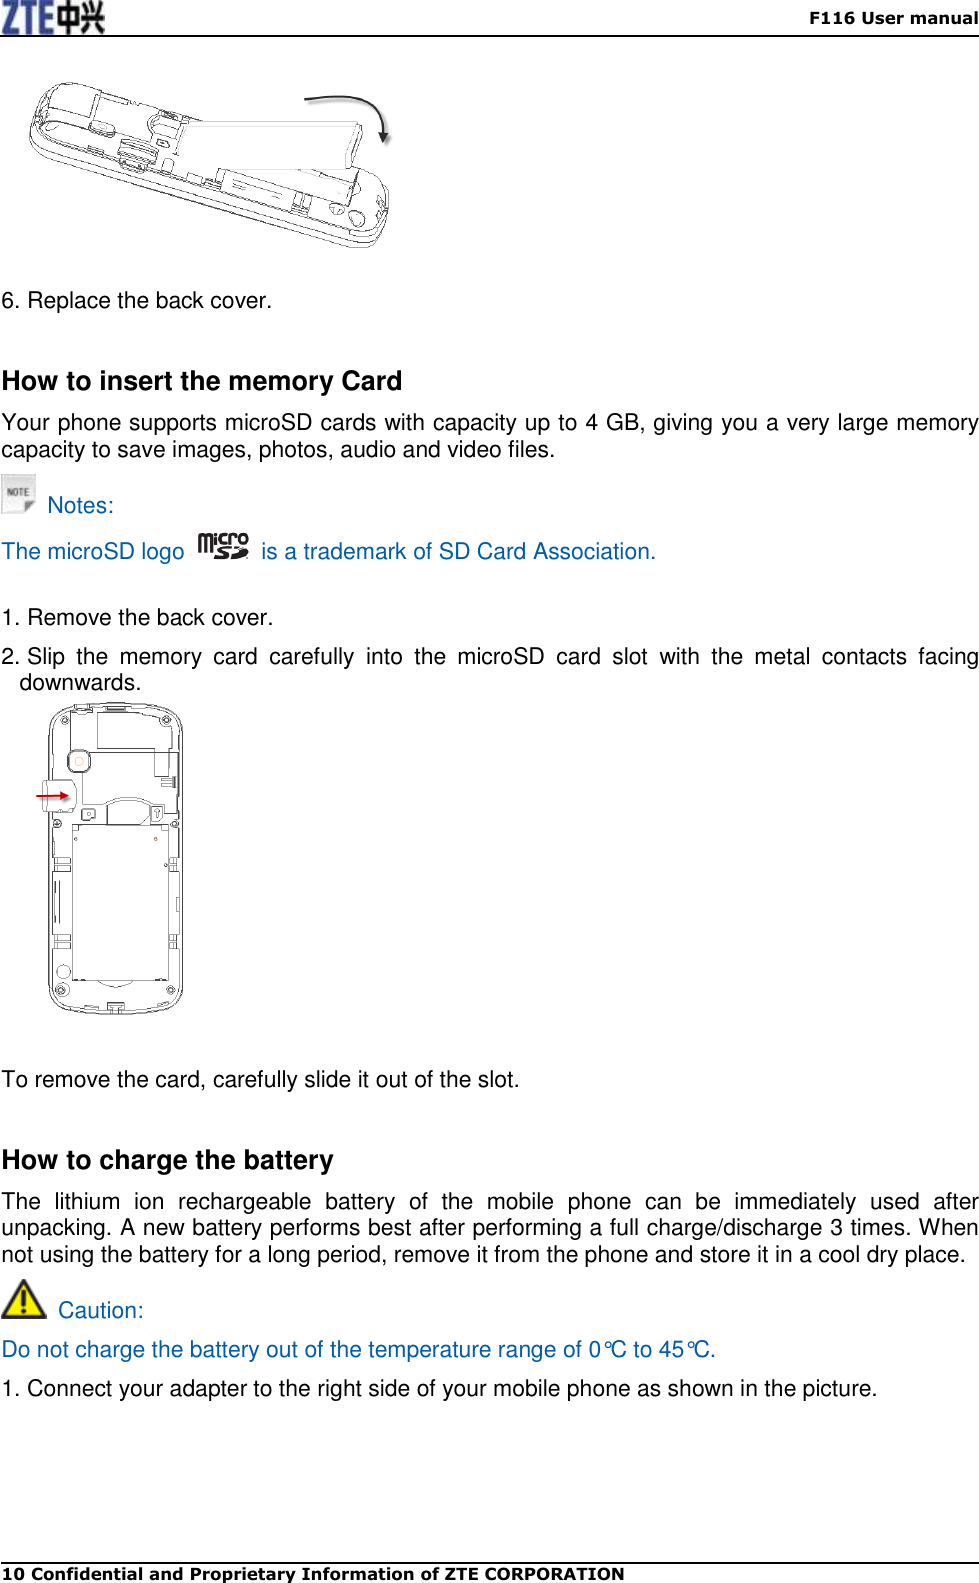    F116 User manual 10 Confidential and Proprietary Information of ZTE CORPORATION   6. Replace the back cover.  How to insert the memory Card Your phone supports microSD cards with capacity up to 4 GB, giving you a very large memory capacity to save images, photos, audio and video files.   Notes: The microSD logo    is a trademark of SD Card Association.  1. Remove the back cover. 2. Slip  the  memory  card  carefully  into  the  microSD  card  slot  with  the  metal  contacts  facing downwards.    To remove the card, carefully slide it out of the slot.    How to charge the battery The  lithium  ion  rechargeable  battery  of  the  mobile  phone  can  be  immediately  used  after unpacking. A new battery performs best after performing a full charge/discharge 3 times. When not using the battery for a long period, remove it from the phone and store it in a cool dry place.   Caution: Do not charge the battery out of the temperature range of 0°C to 45°C. 1. Connect your adapter to the right side of your mobile phone as shown in the picture. 